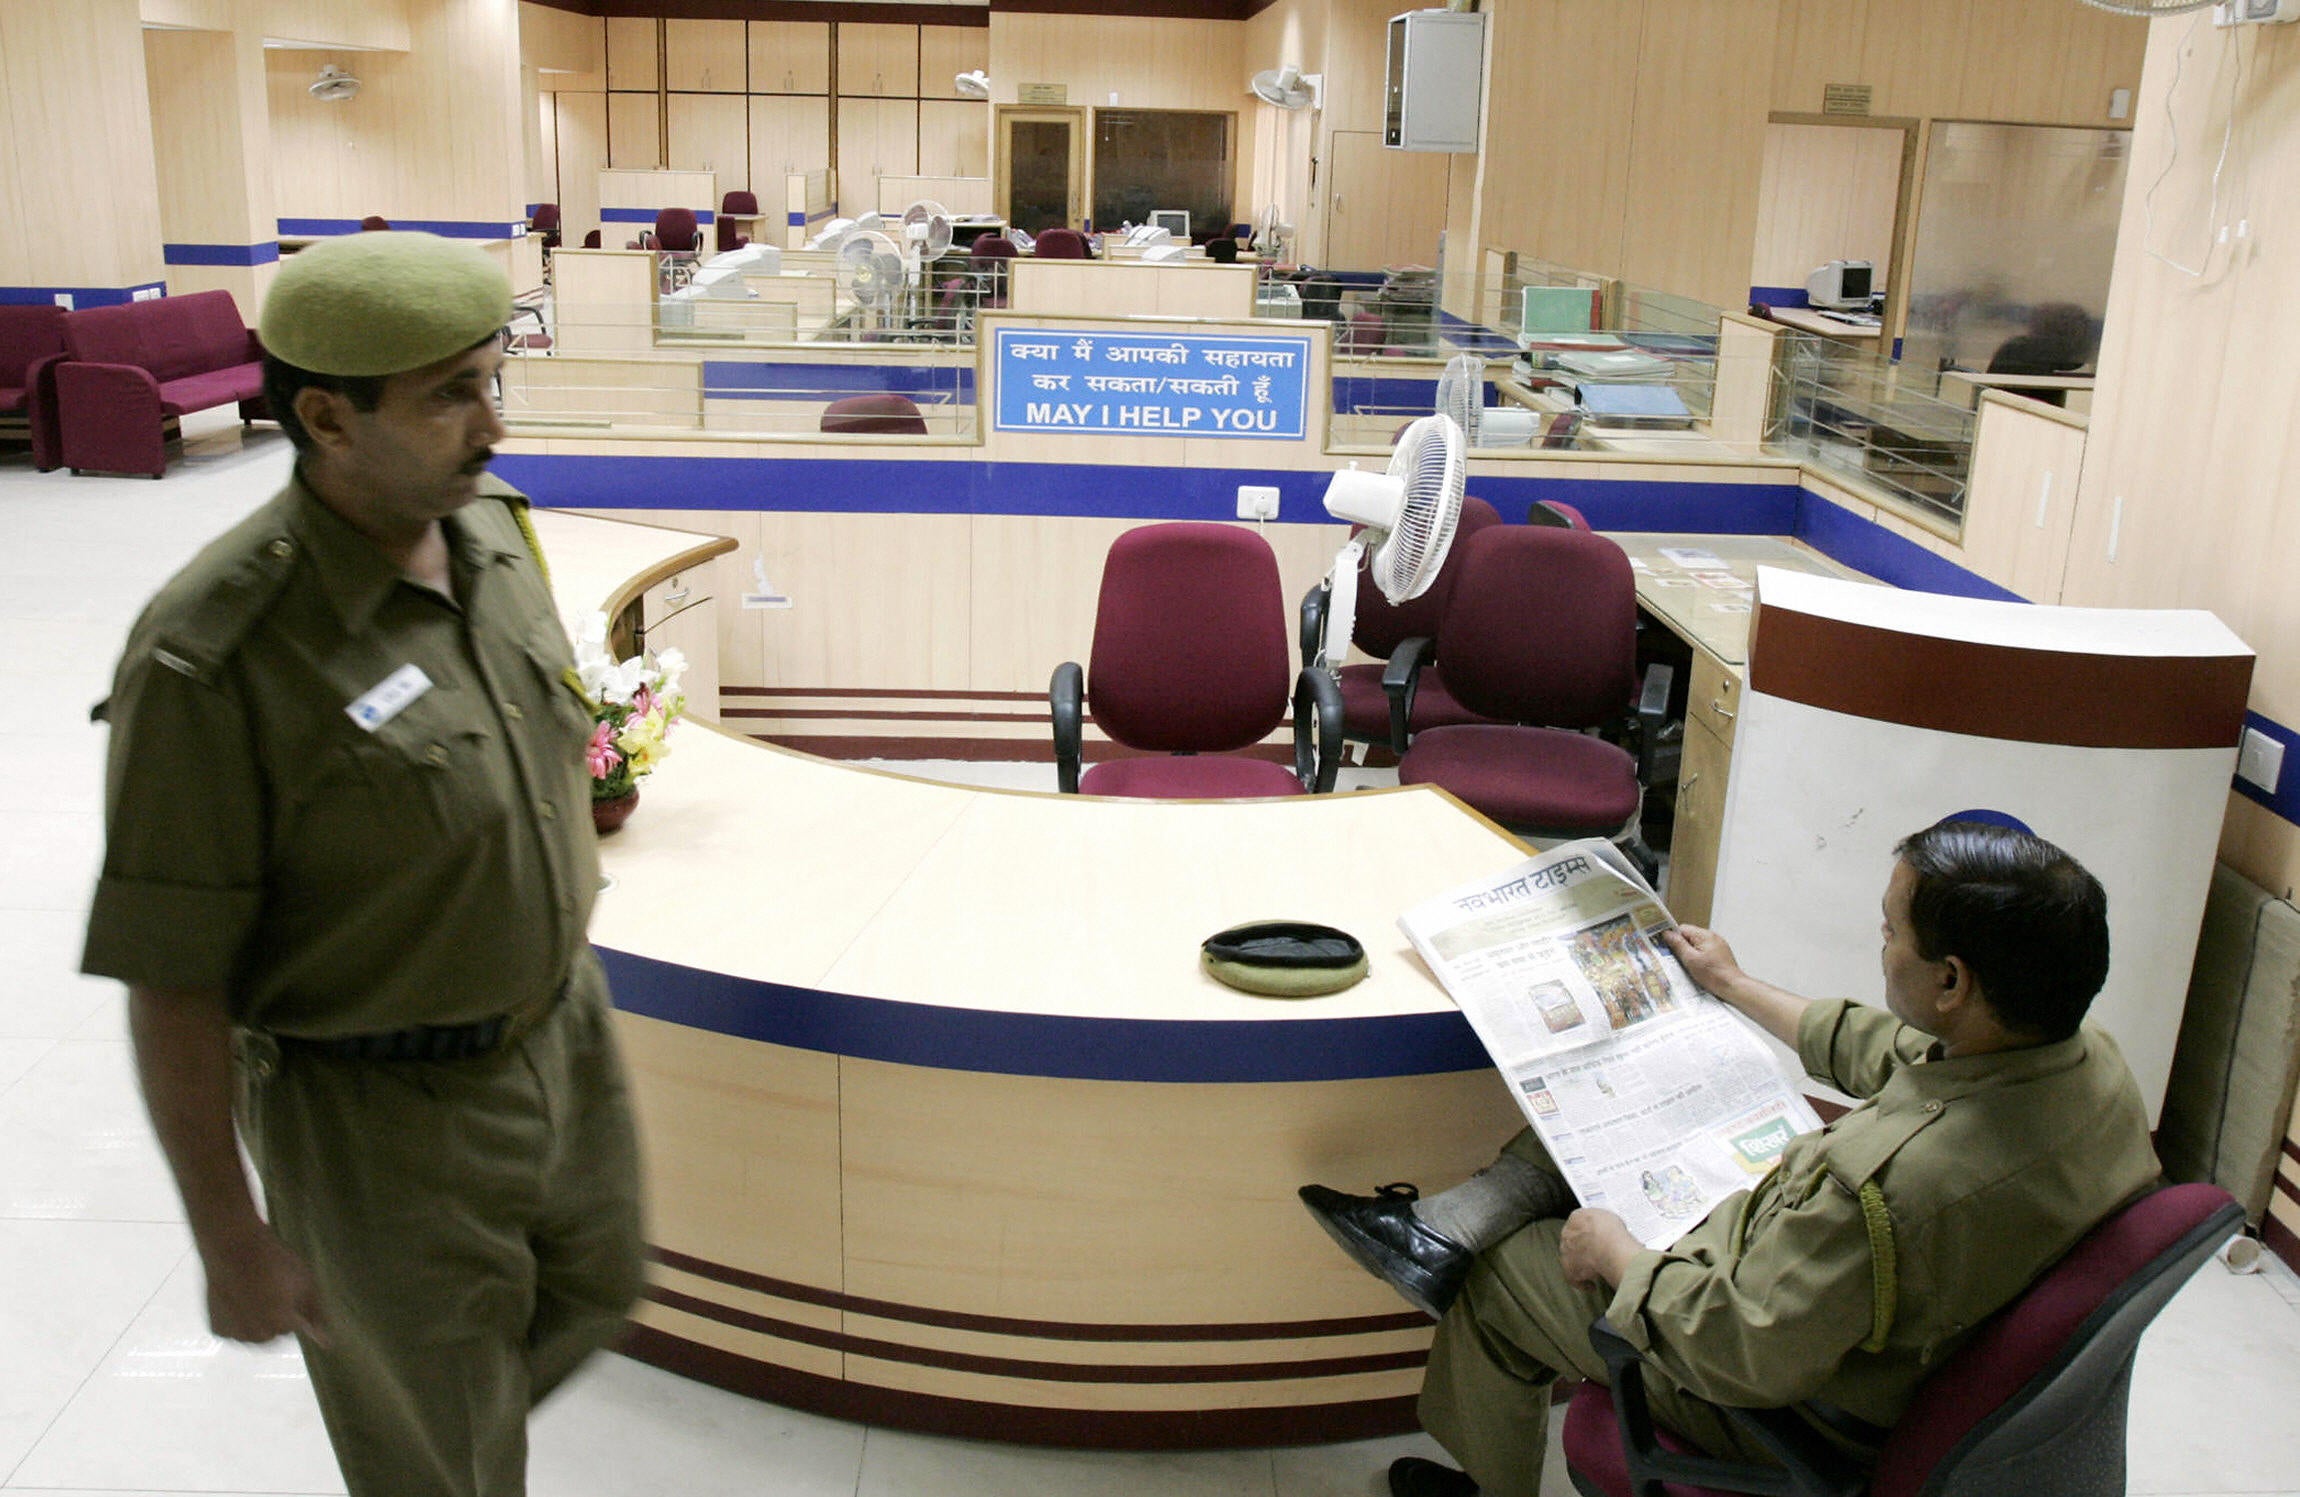 Representative image: A government bank in India. The robbery took place in Union Bank of India in Delhi on Sunday